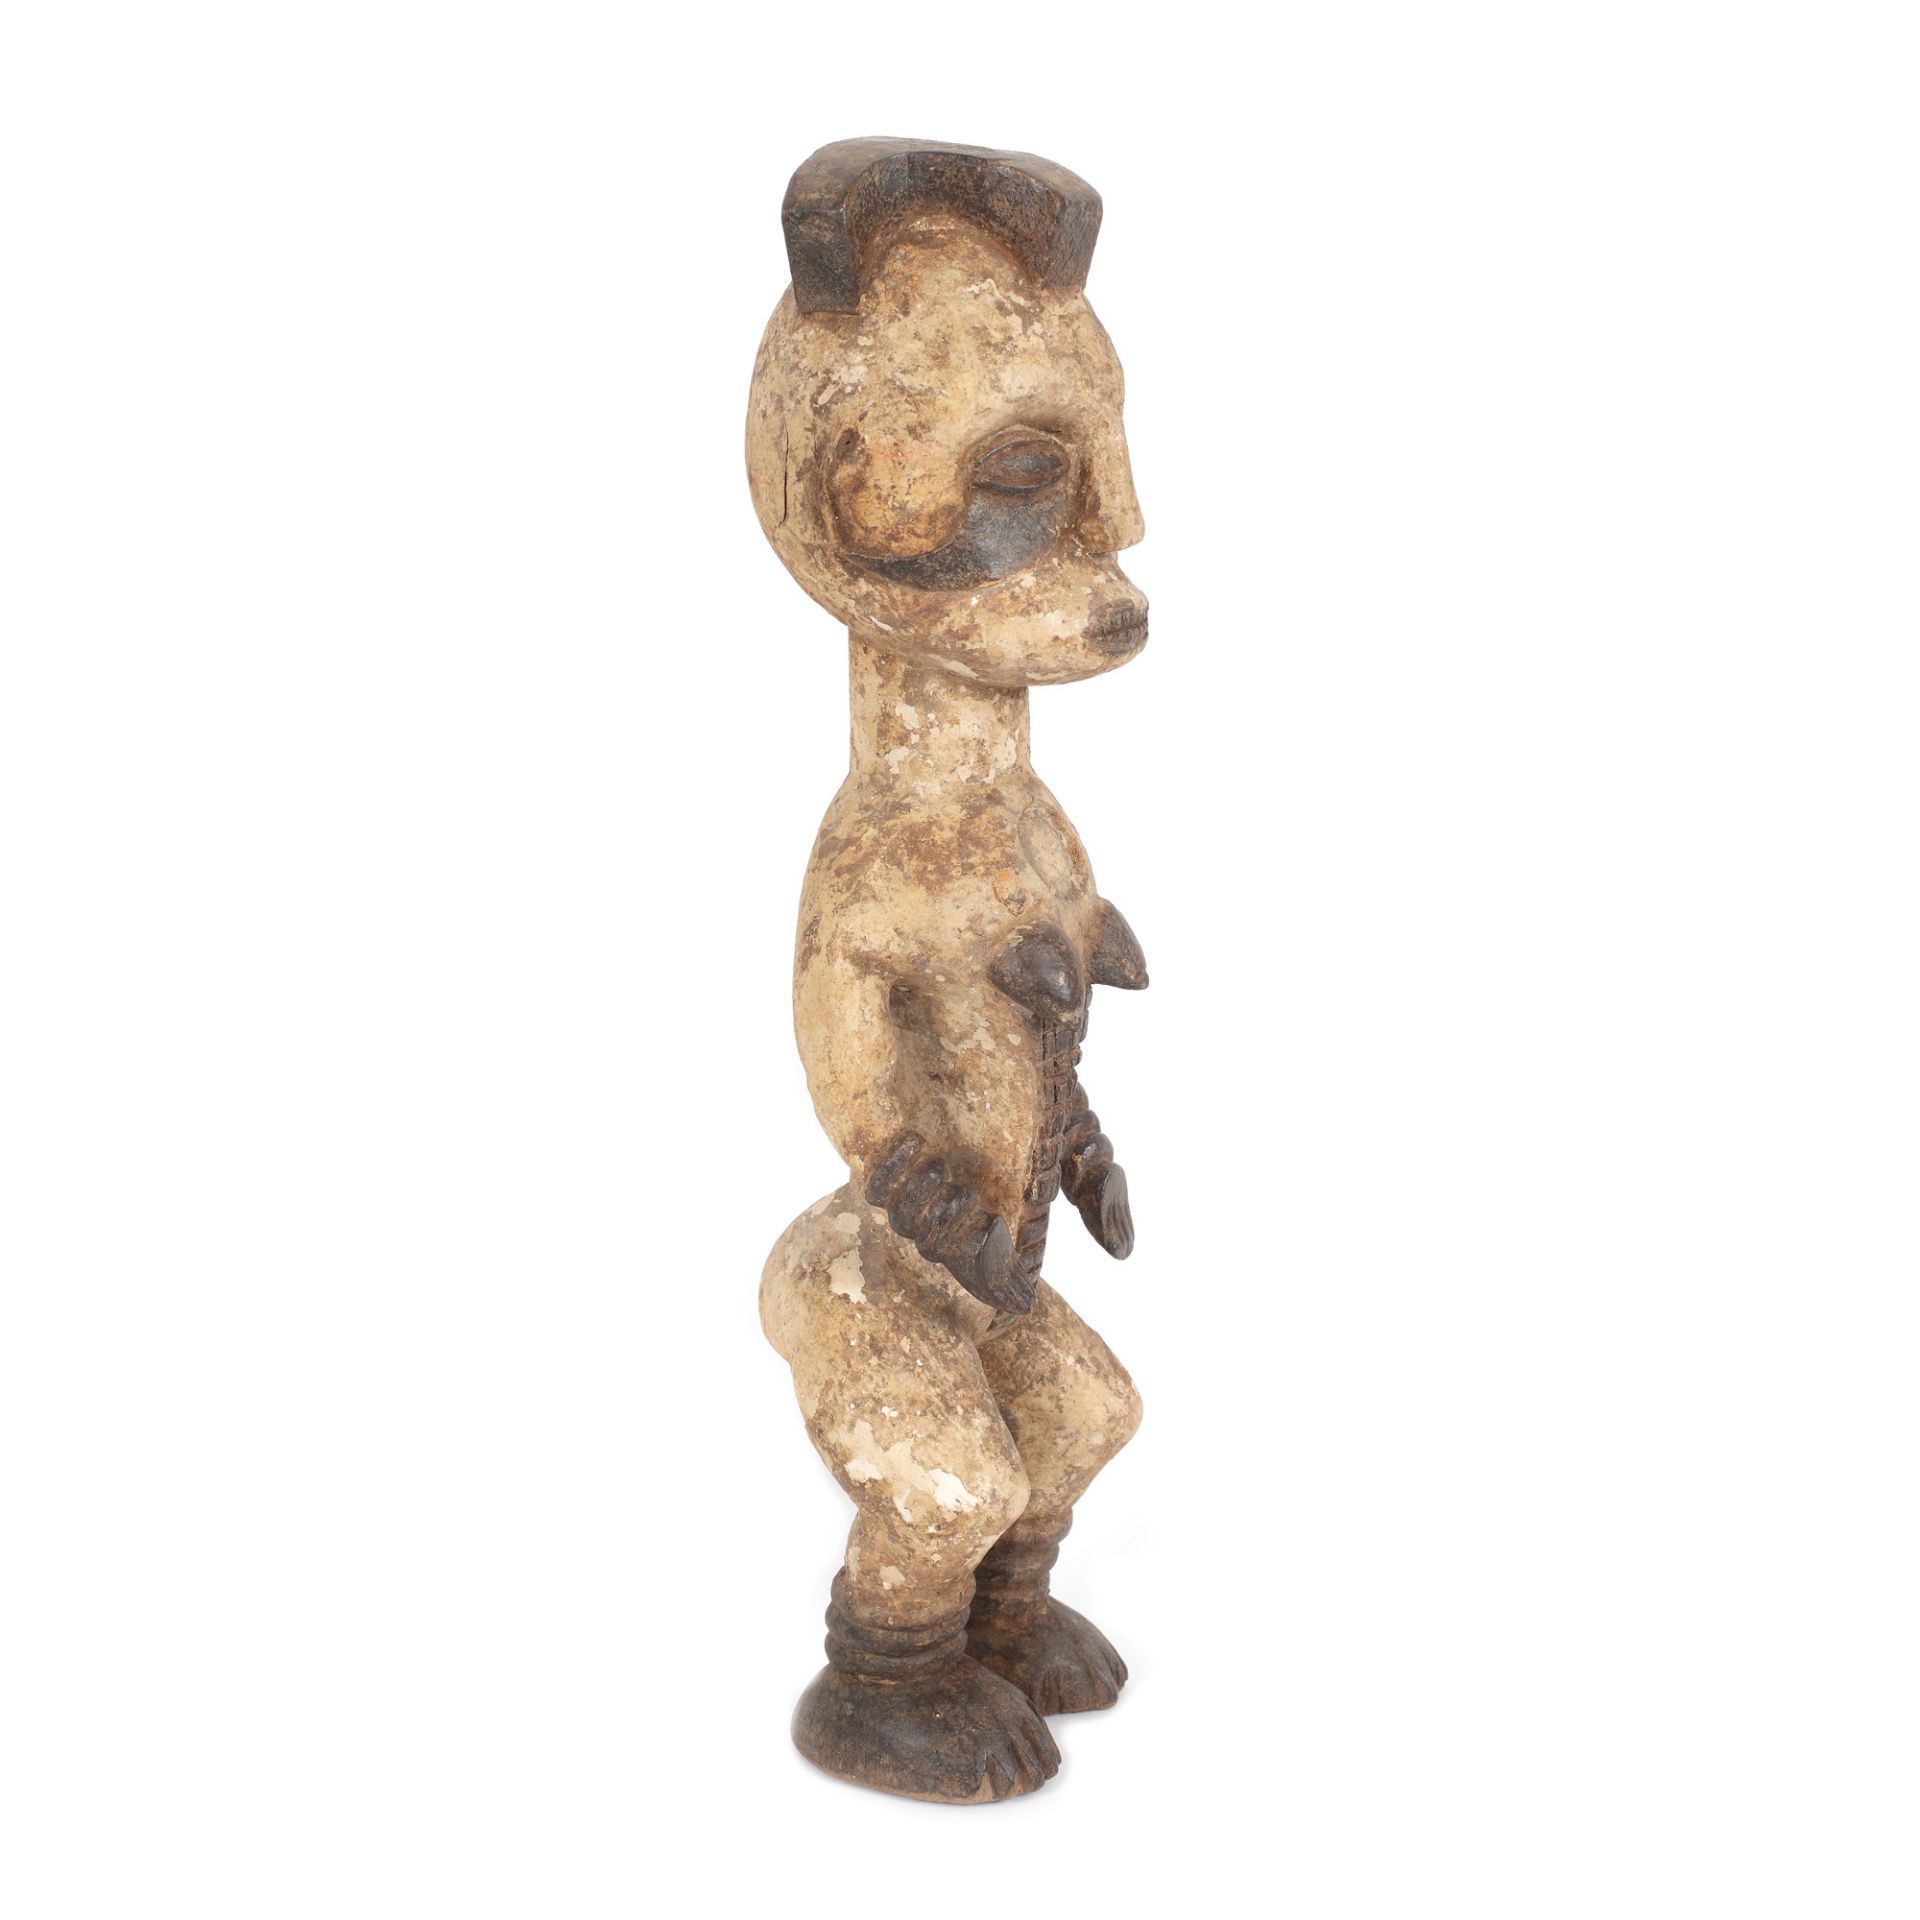 Bété African statuette, Ivory Coast, early 20th century - Image 2 of 3